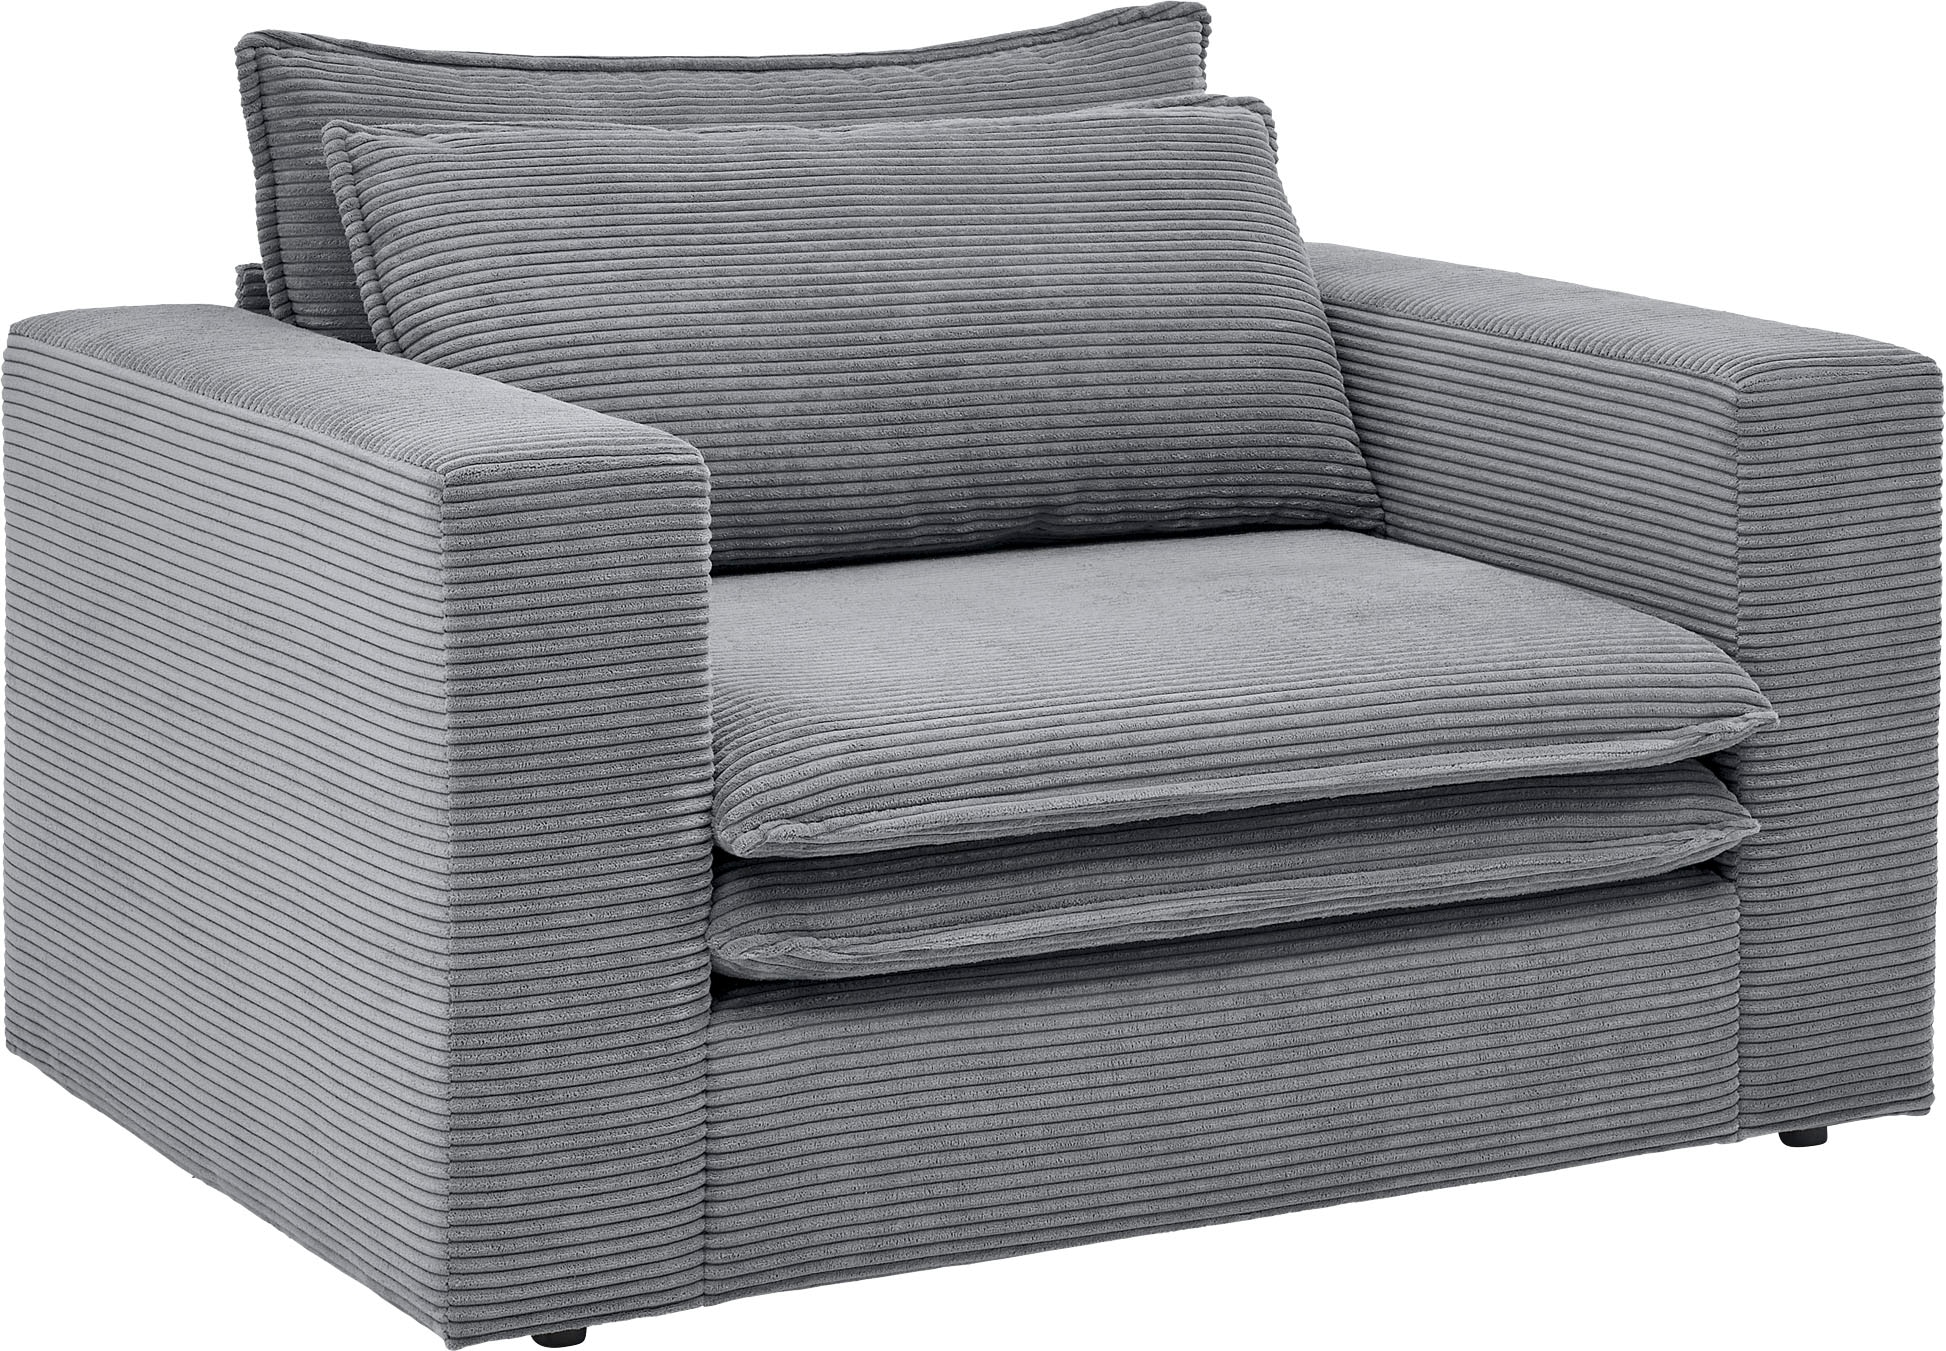 Places of Style Loveseat »PIAGGE«, trendiger bei Cord, OTTO Hochwertiger Loveseat